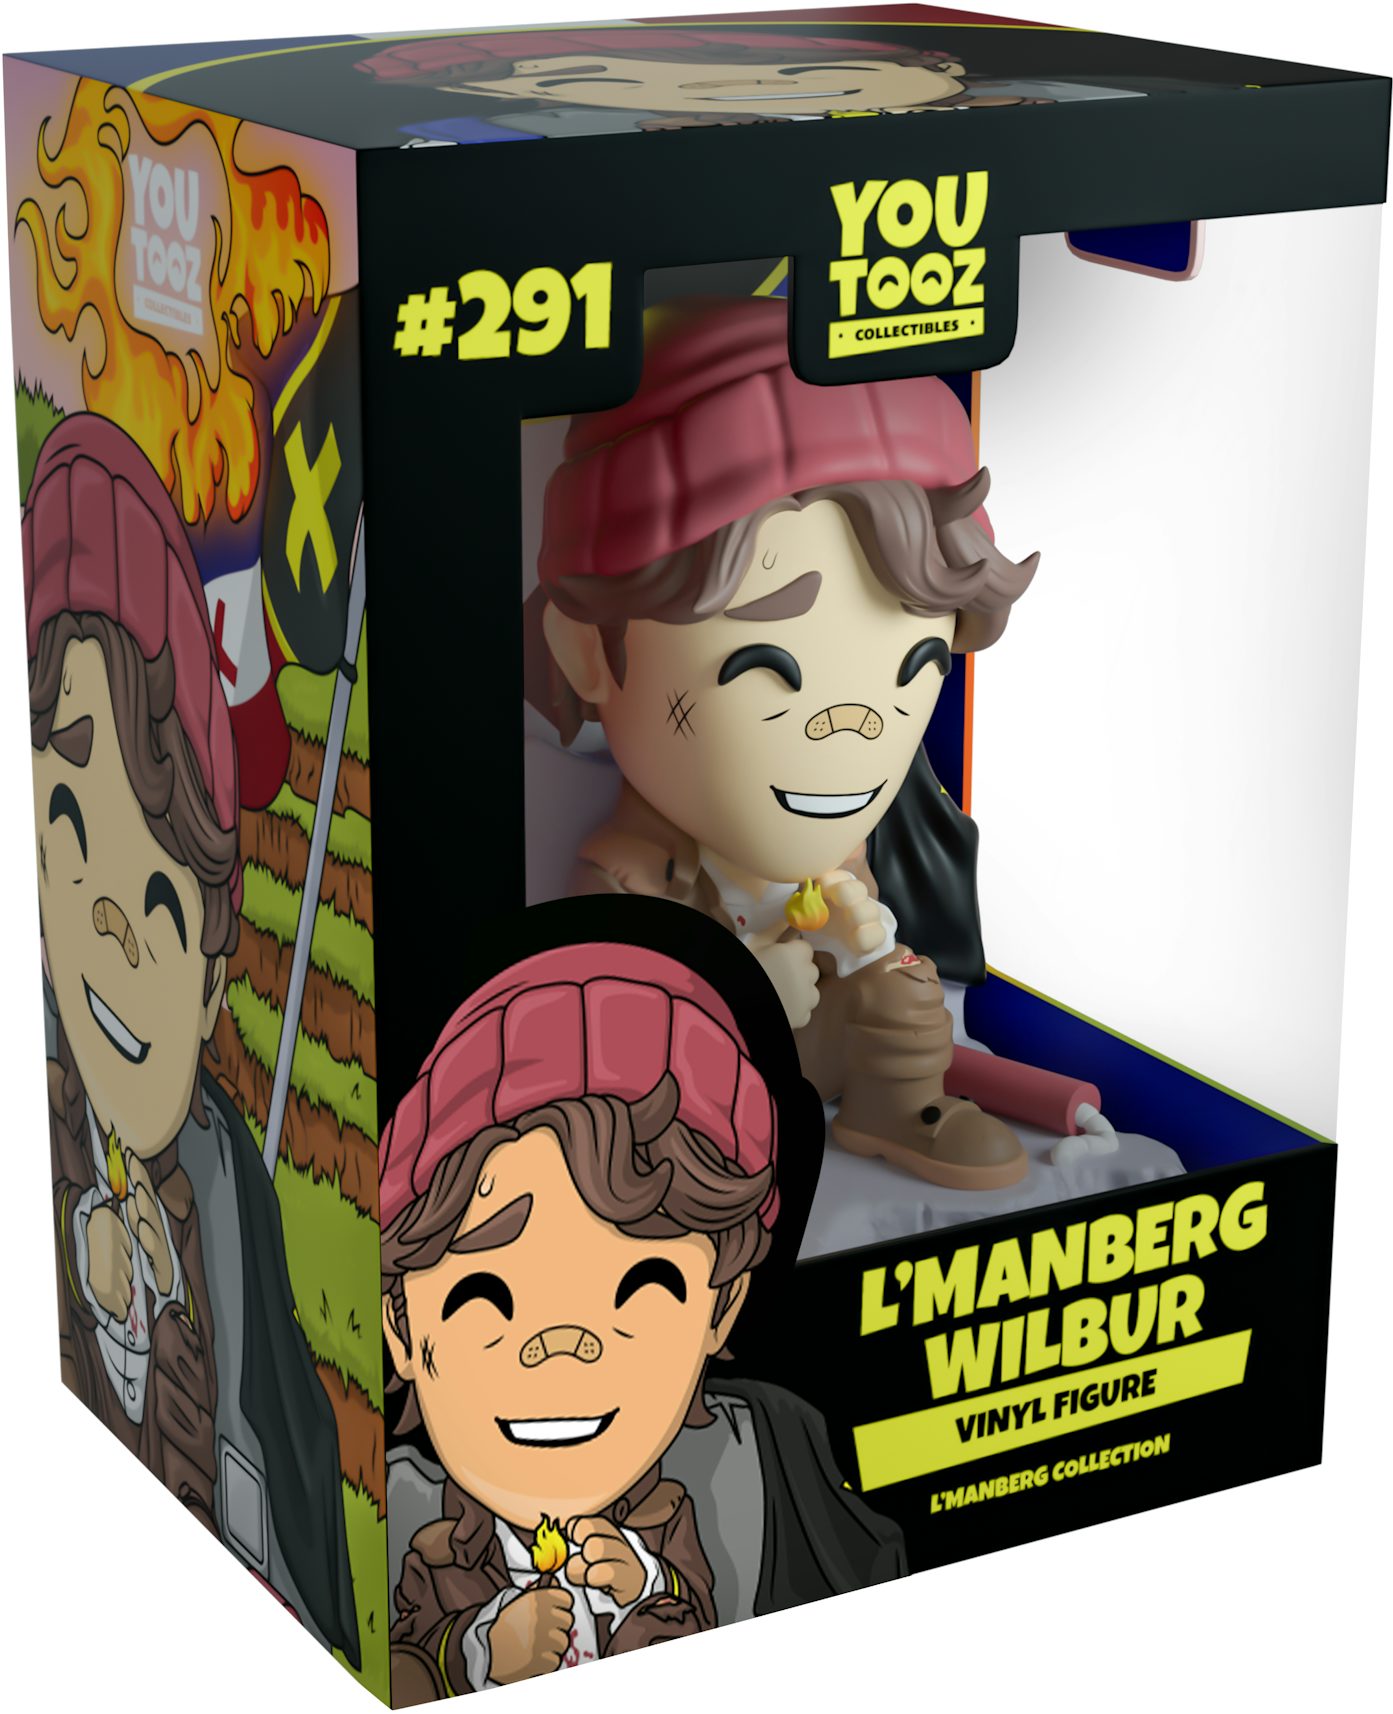 Youtooz L'Manberg Tubbo #290 4.8 inch Vinyl Figure, Collectible Gamer  Figure from Youtooz: Gaming Collection